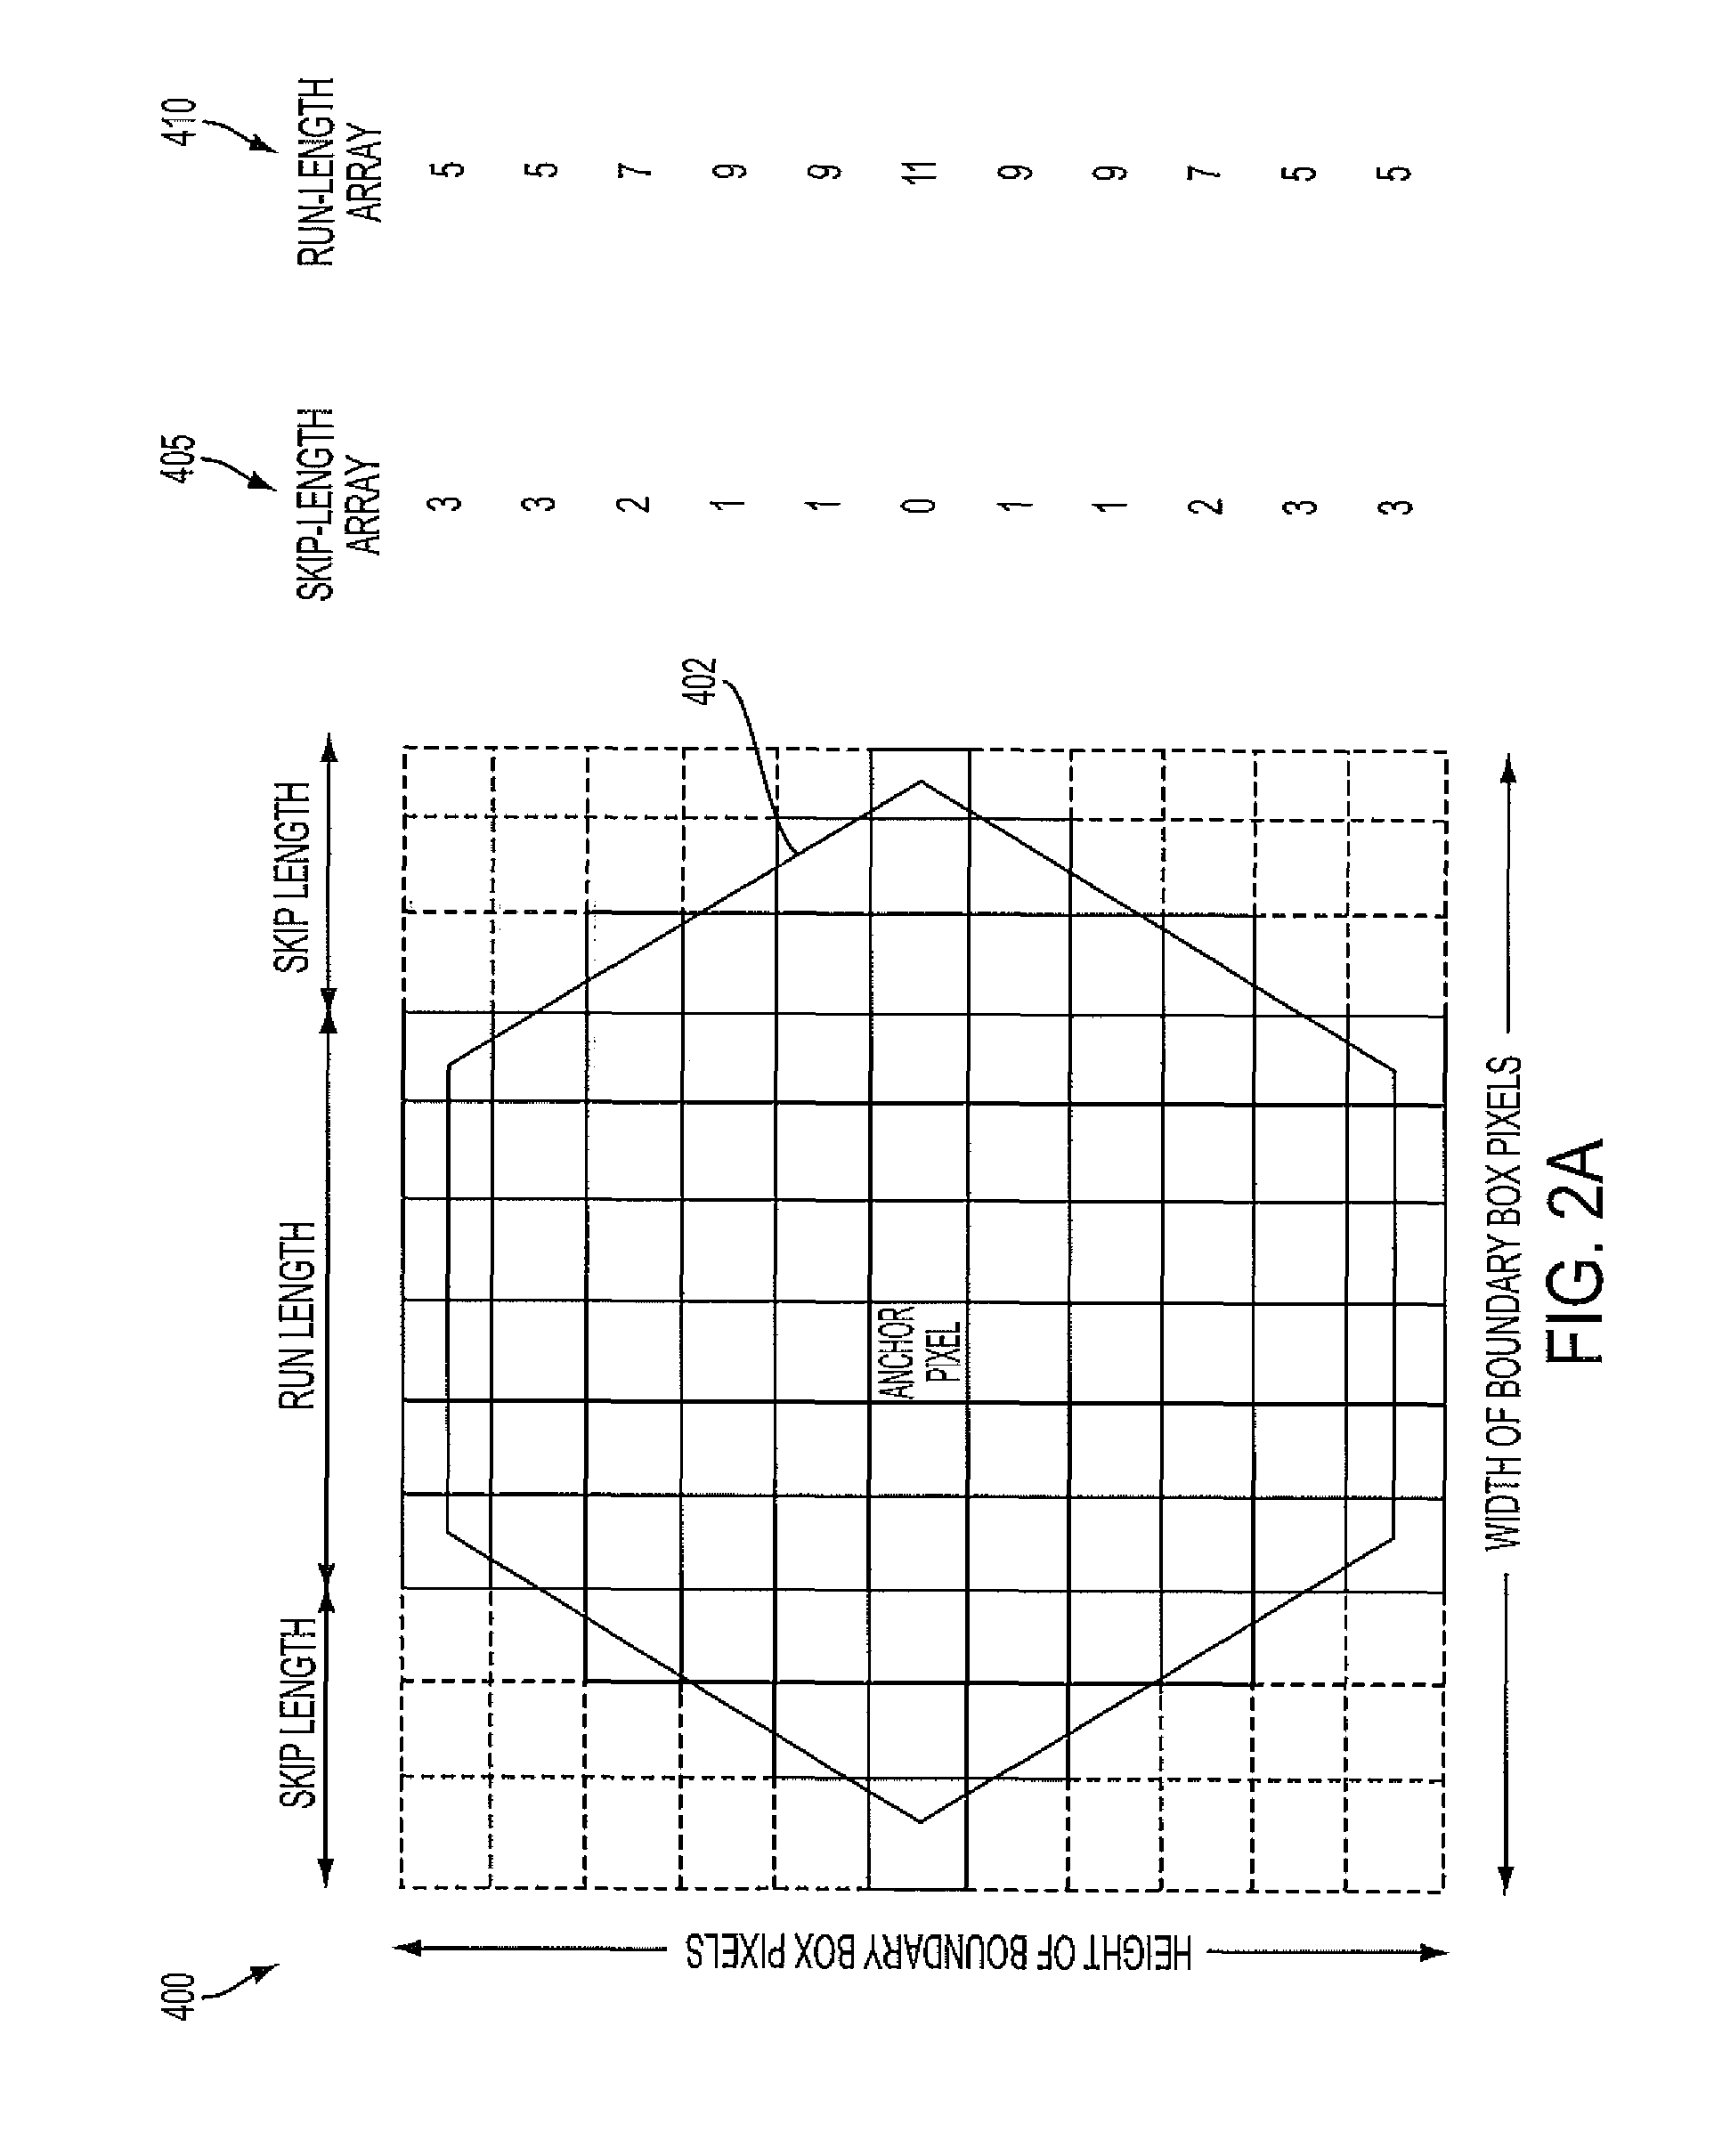 Systems and methods for processing image pixels in a nuclear medicine imaging system